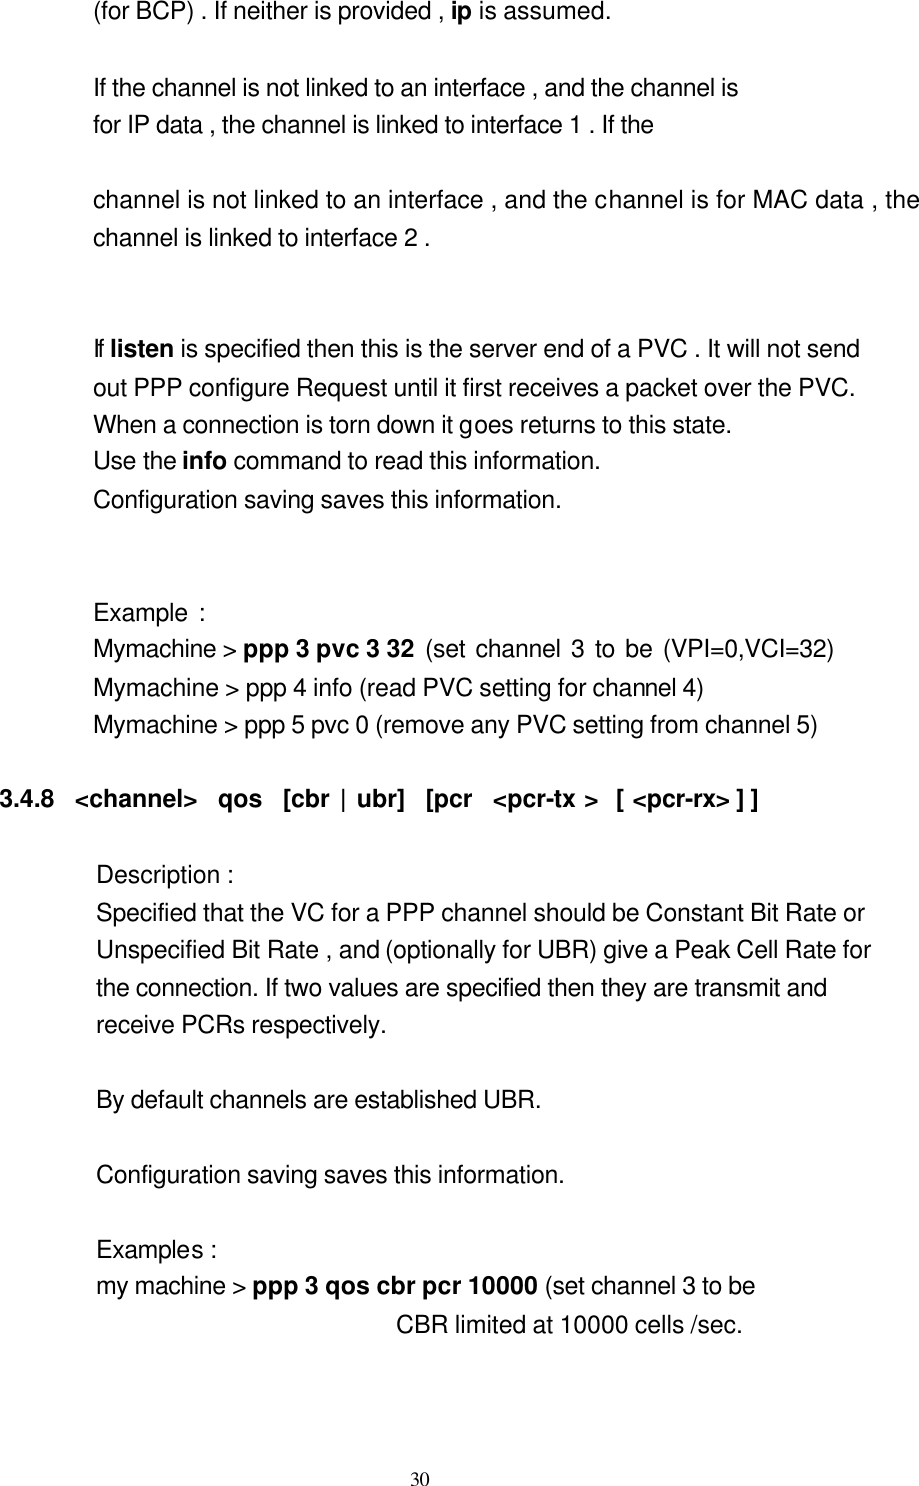  30 (for BCP) . If neither is provided , ip is assumed.  If the channel is not linked to an interface , and the channel is for IP data , the channel is linked to interface 1 . If the  channel is not linked to an interface , and the channel is for MAC data , the  channel is linked to interface 2 .   If listen is specified then this is the server end of a PVC . It will not send   out PPP configure Request until it first receives a packet over the PVC.   When a connection is torn down it goes returns to this state. Use the info command to read this information. Configuration saving saves this information.   Example :   Mymachine &gt; ppp 3 pvc 3 32 (set channel 3 to be (VPI=0,VCI=32)            Mymachine &gt; ppp 4 info (read PVC setting for channel 4)   Mymachine &gt; ppp 5 pvc 0 (remove any PVC setting from channel 5)  3.4.8  &lt;channel&gt;  qos  [cbr | ubr]  [pcr  &lt;pcr-tx &gt;  [ &lt;pcr-rx&gt; ] ]  Description :   Specified that the VC for a PPP channel should be Constant Bit Rate or   Unspecified Bit Rate , and (optionally for UBR) give a Peak Cell Rate for   the connection. If two values are specified then they are transmit and   receive PCRs respectively.                By default channels are established UBR.  Configuration saving saves this information.  Examples :   my machine &gt; ppp 3 qos cbr pcr 10000 (set channel 3 to be CBR limited at 10000 cells /sec.     